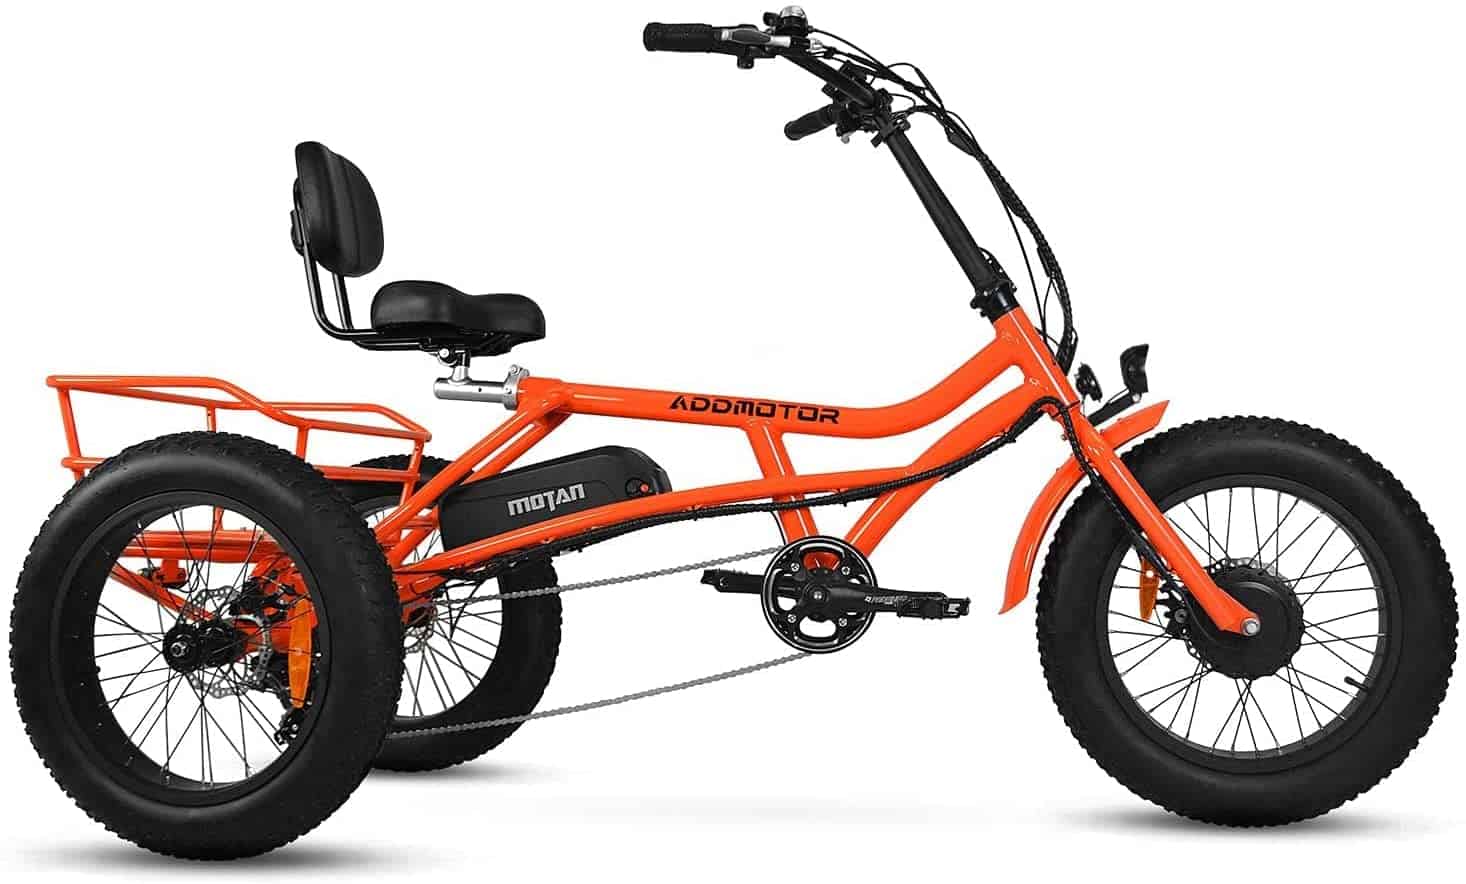 Addmotor Motan Electric Tricycle